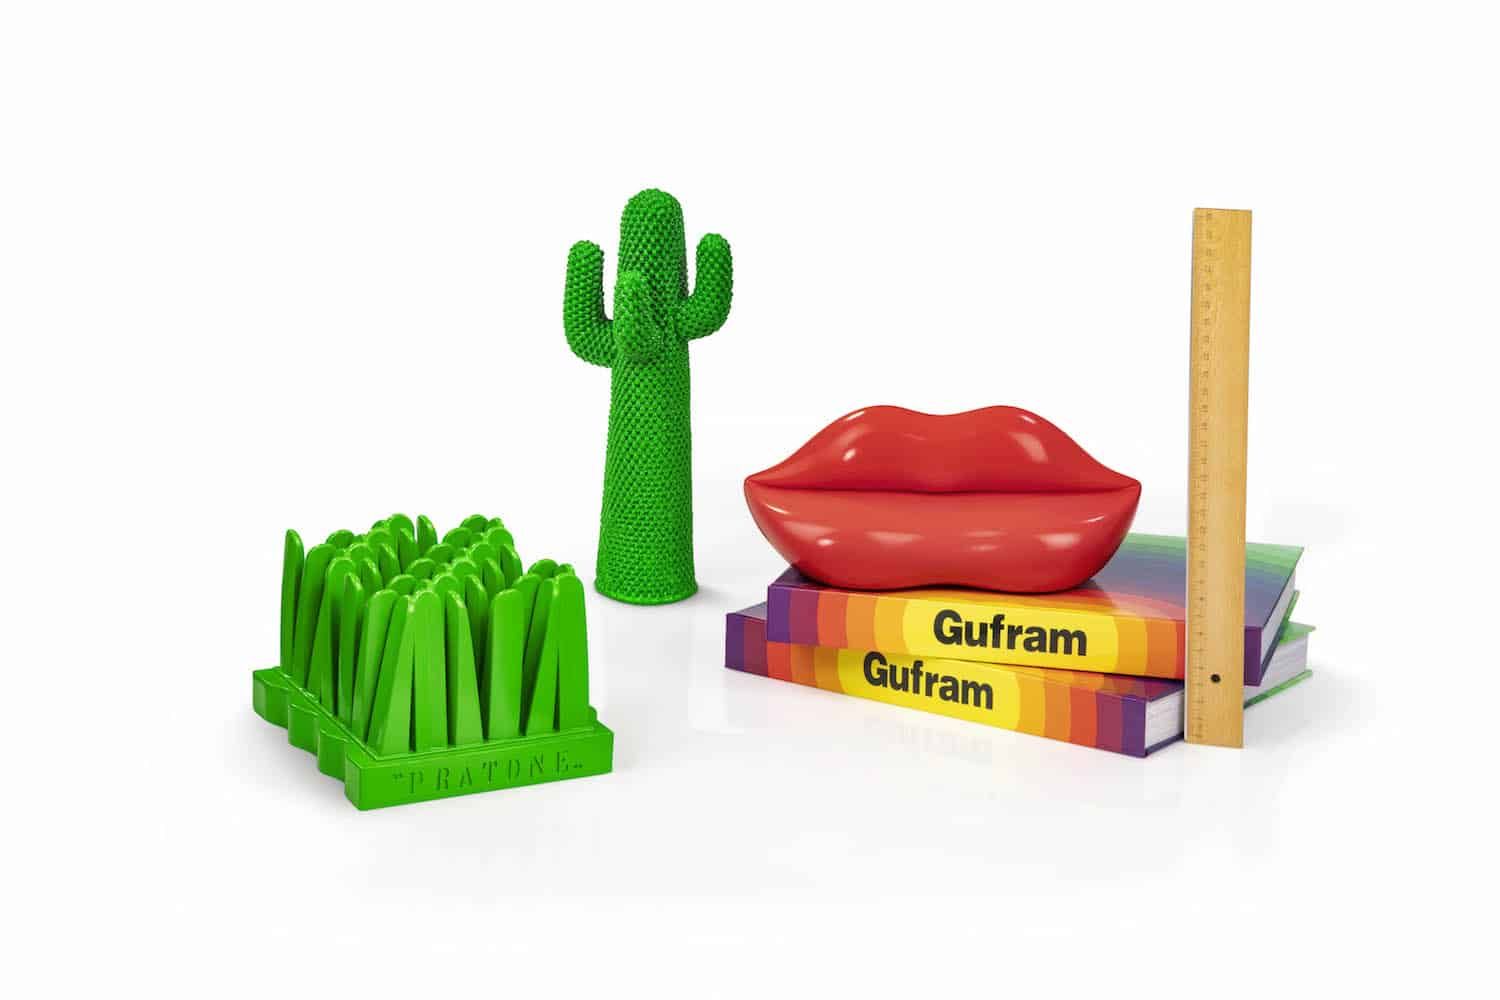 Half a Century After Gufram’s Icons Debuted, Miniature Versions Are Here